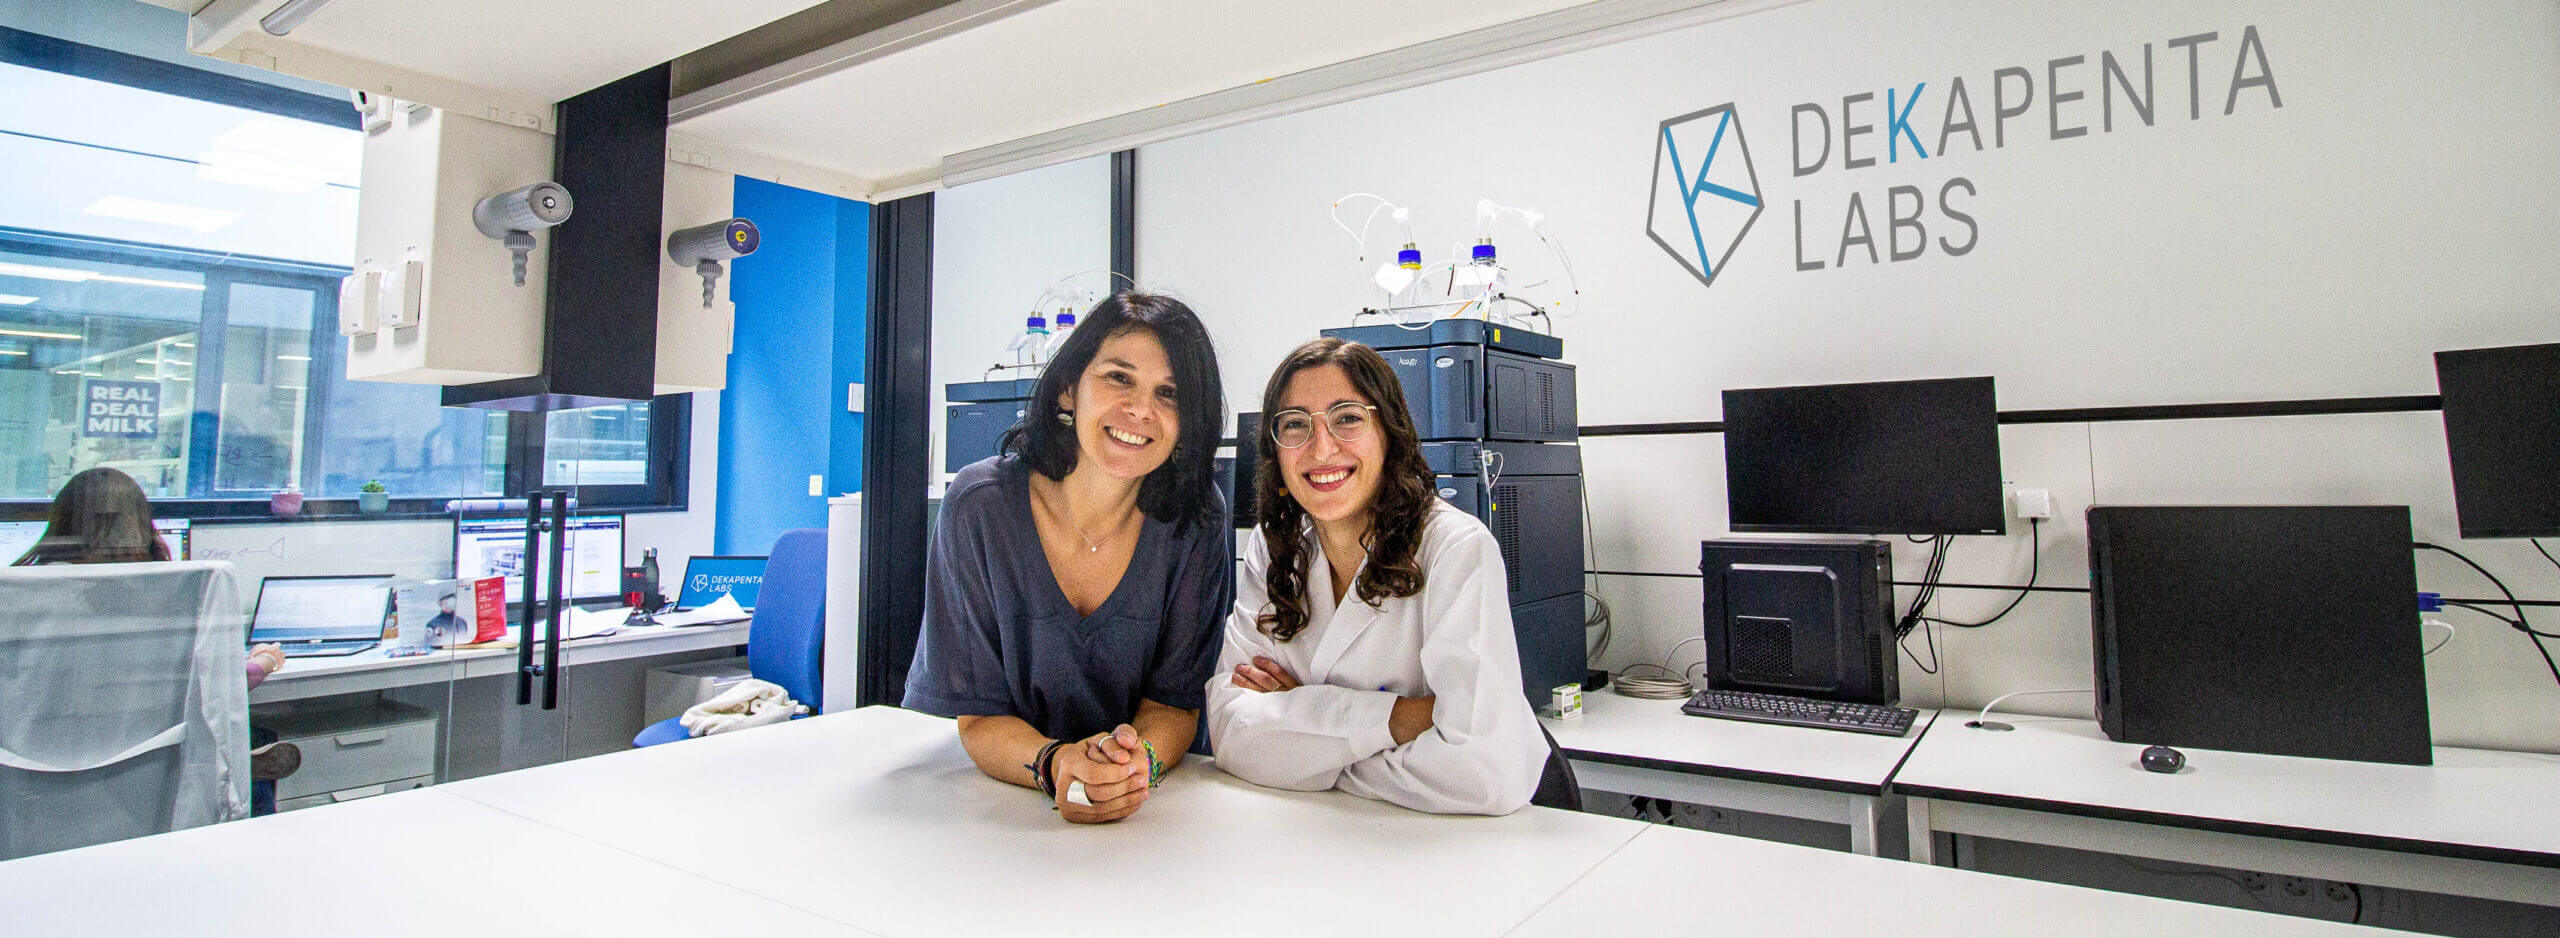 Dekapenta Labs, an analytical services CRO, joins Barcelona Science Park